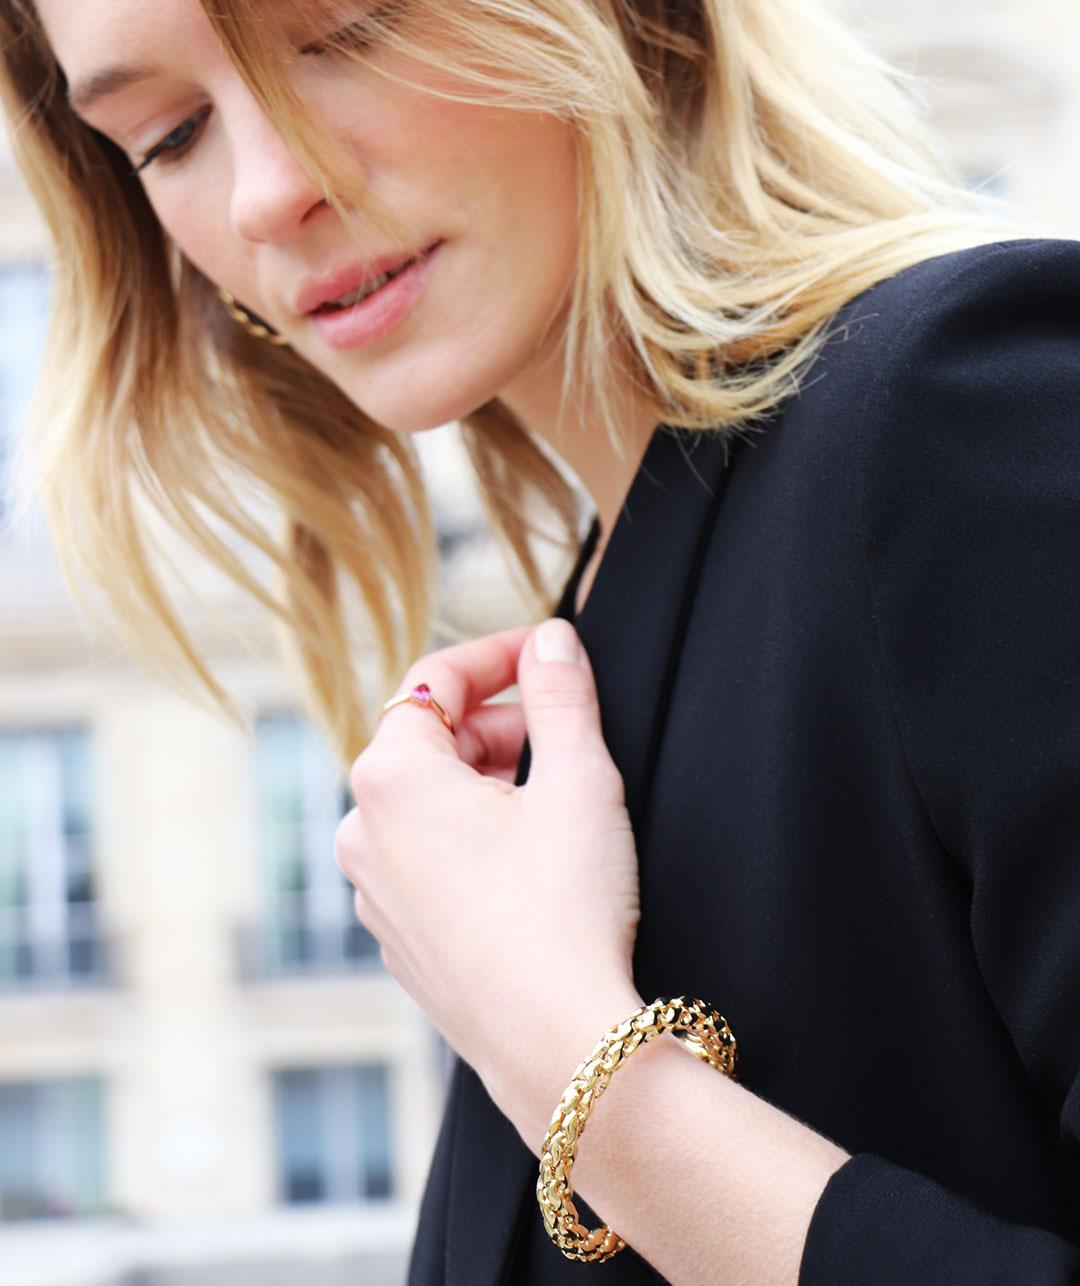 A chic and iconic jewel, the bangle has crossed generations and trends but has never become timeless. Treating yourself to a gold bangle is for life. This luxury bracelet will never lose its value, nor its beauty and shine. Timeless, the bangle can